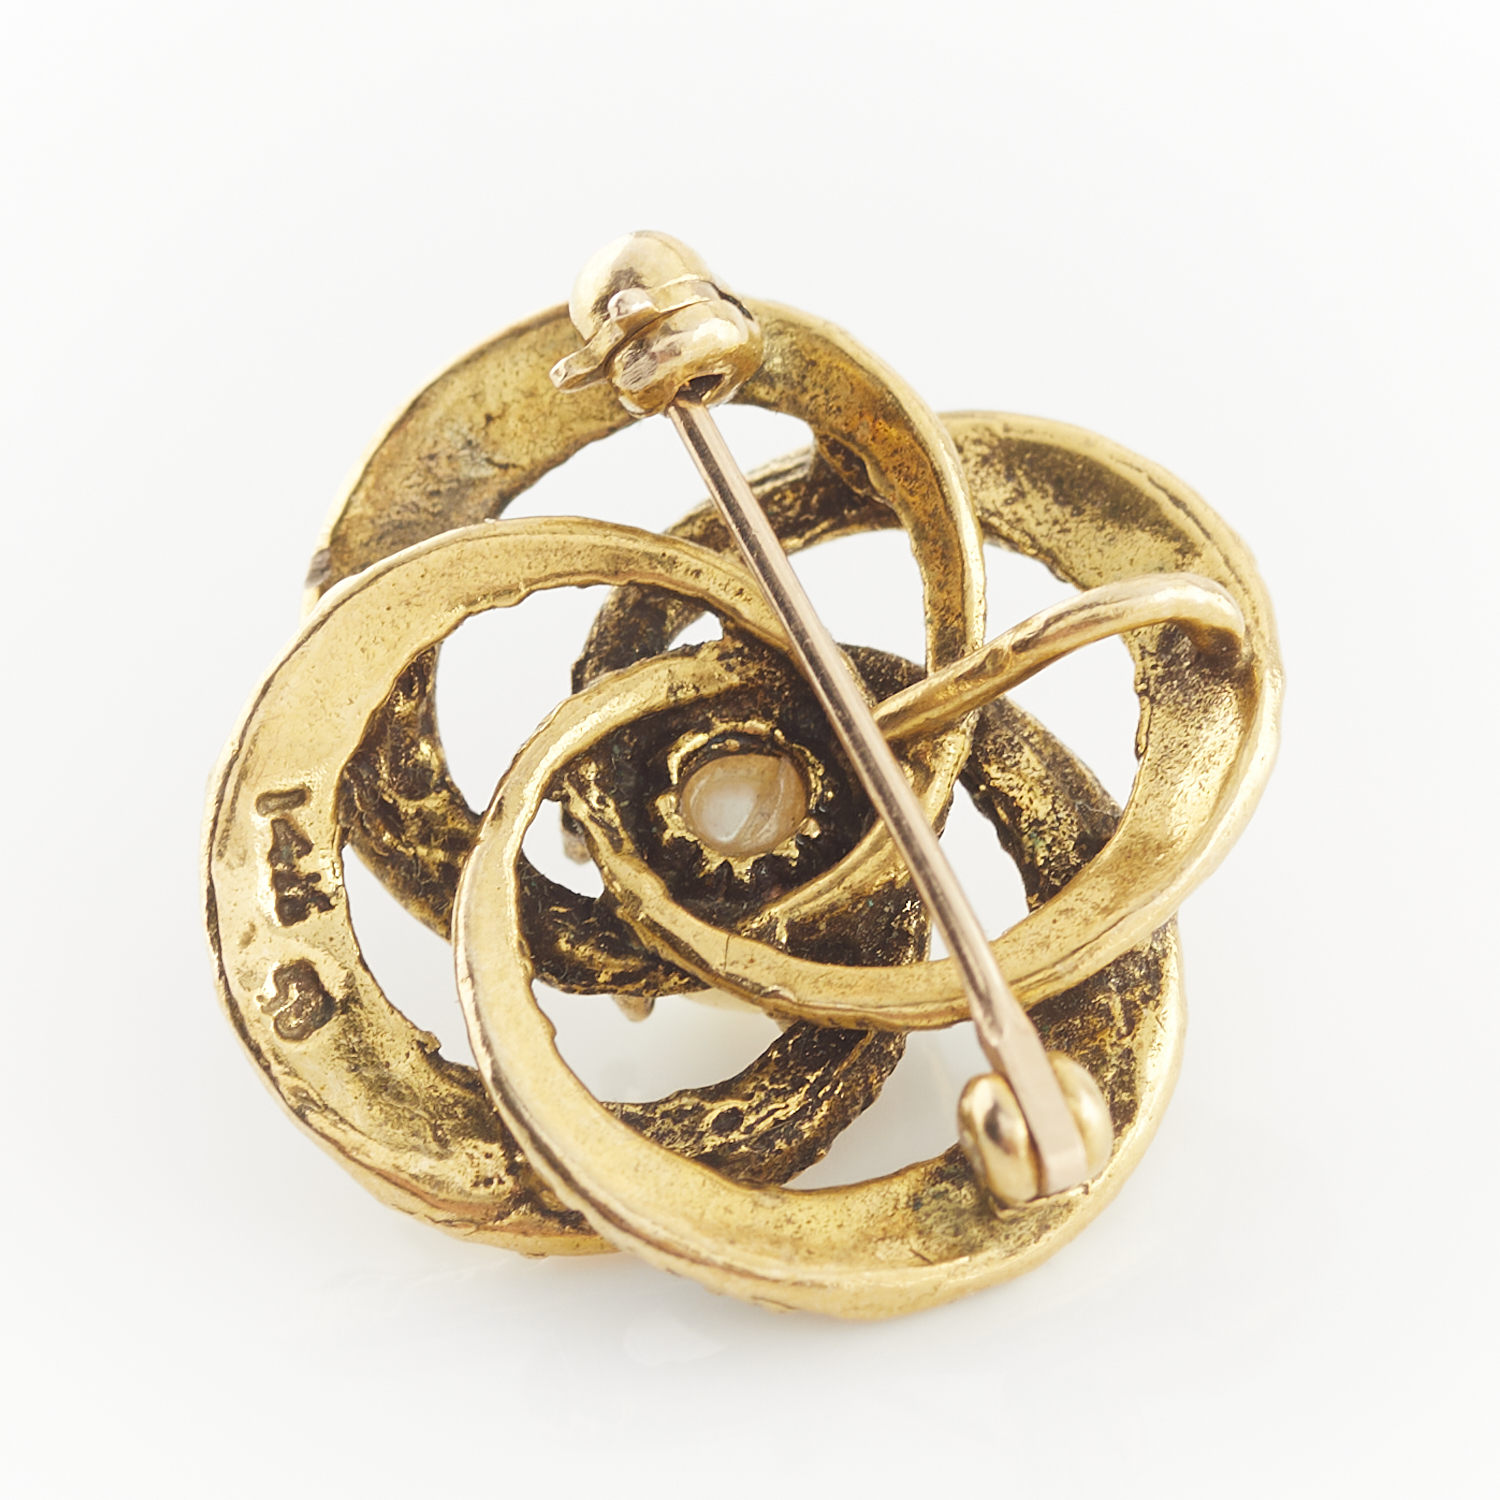 14k Yellow Gold Knot Brooch with Pearl - Image 6 of 8